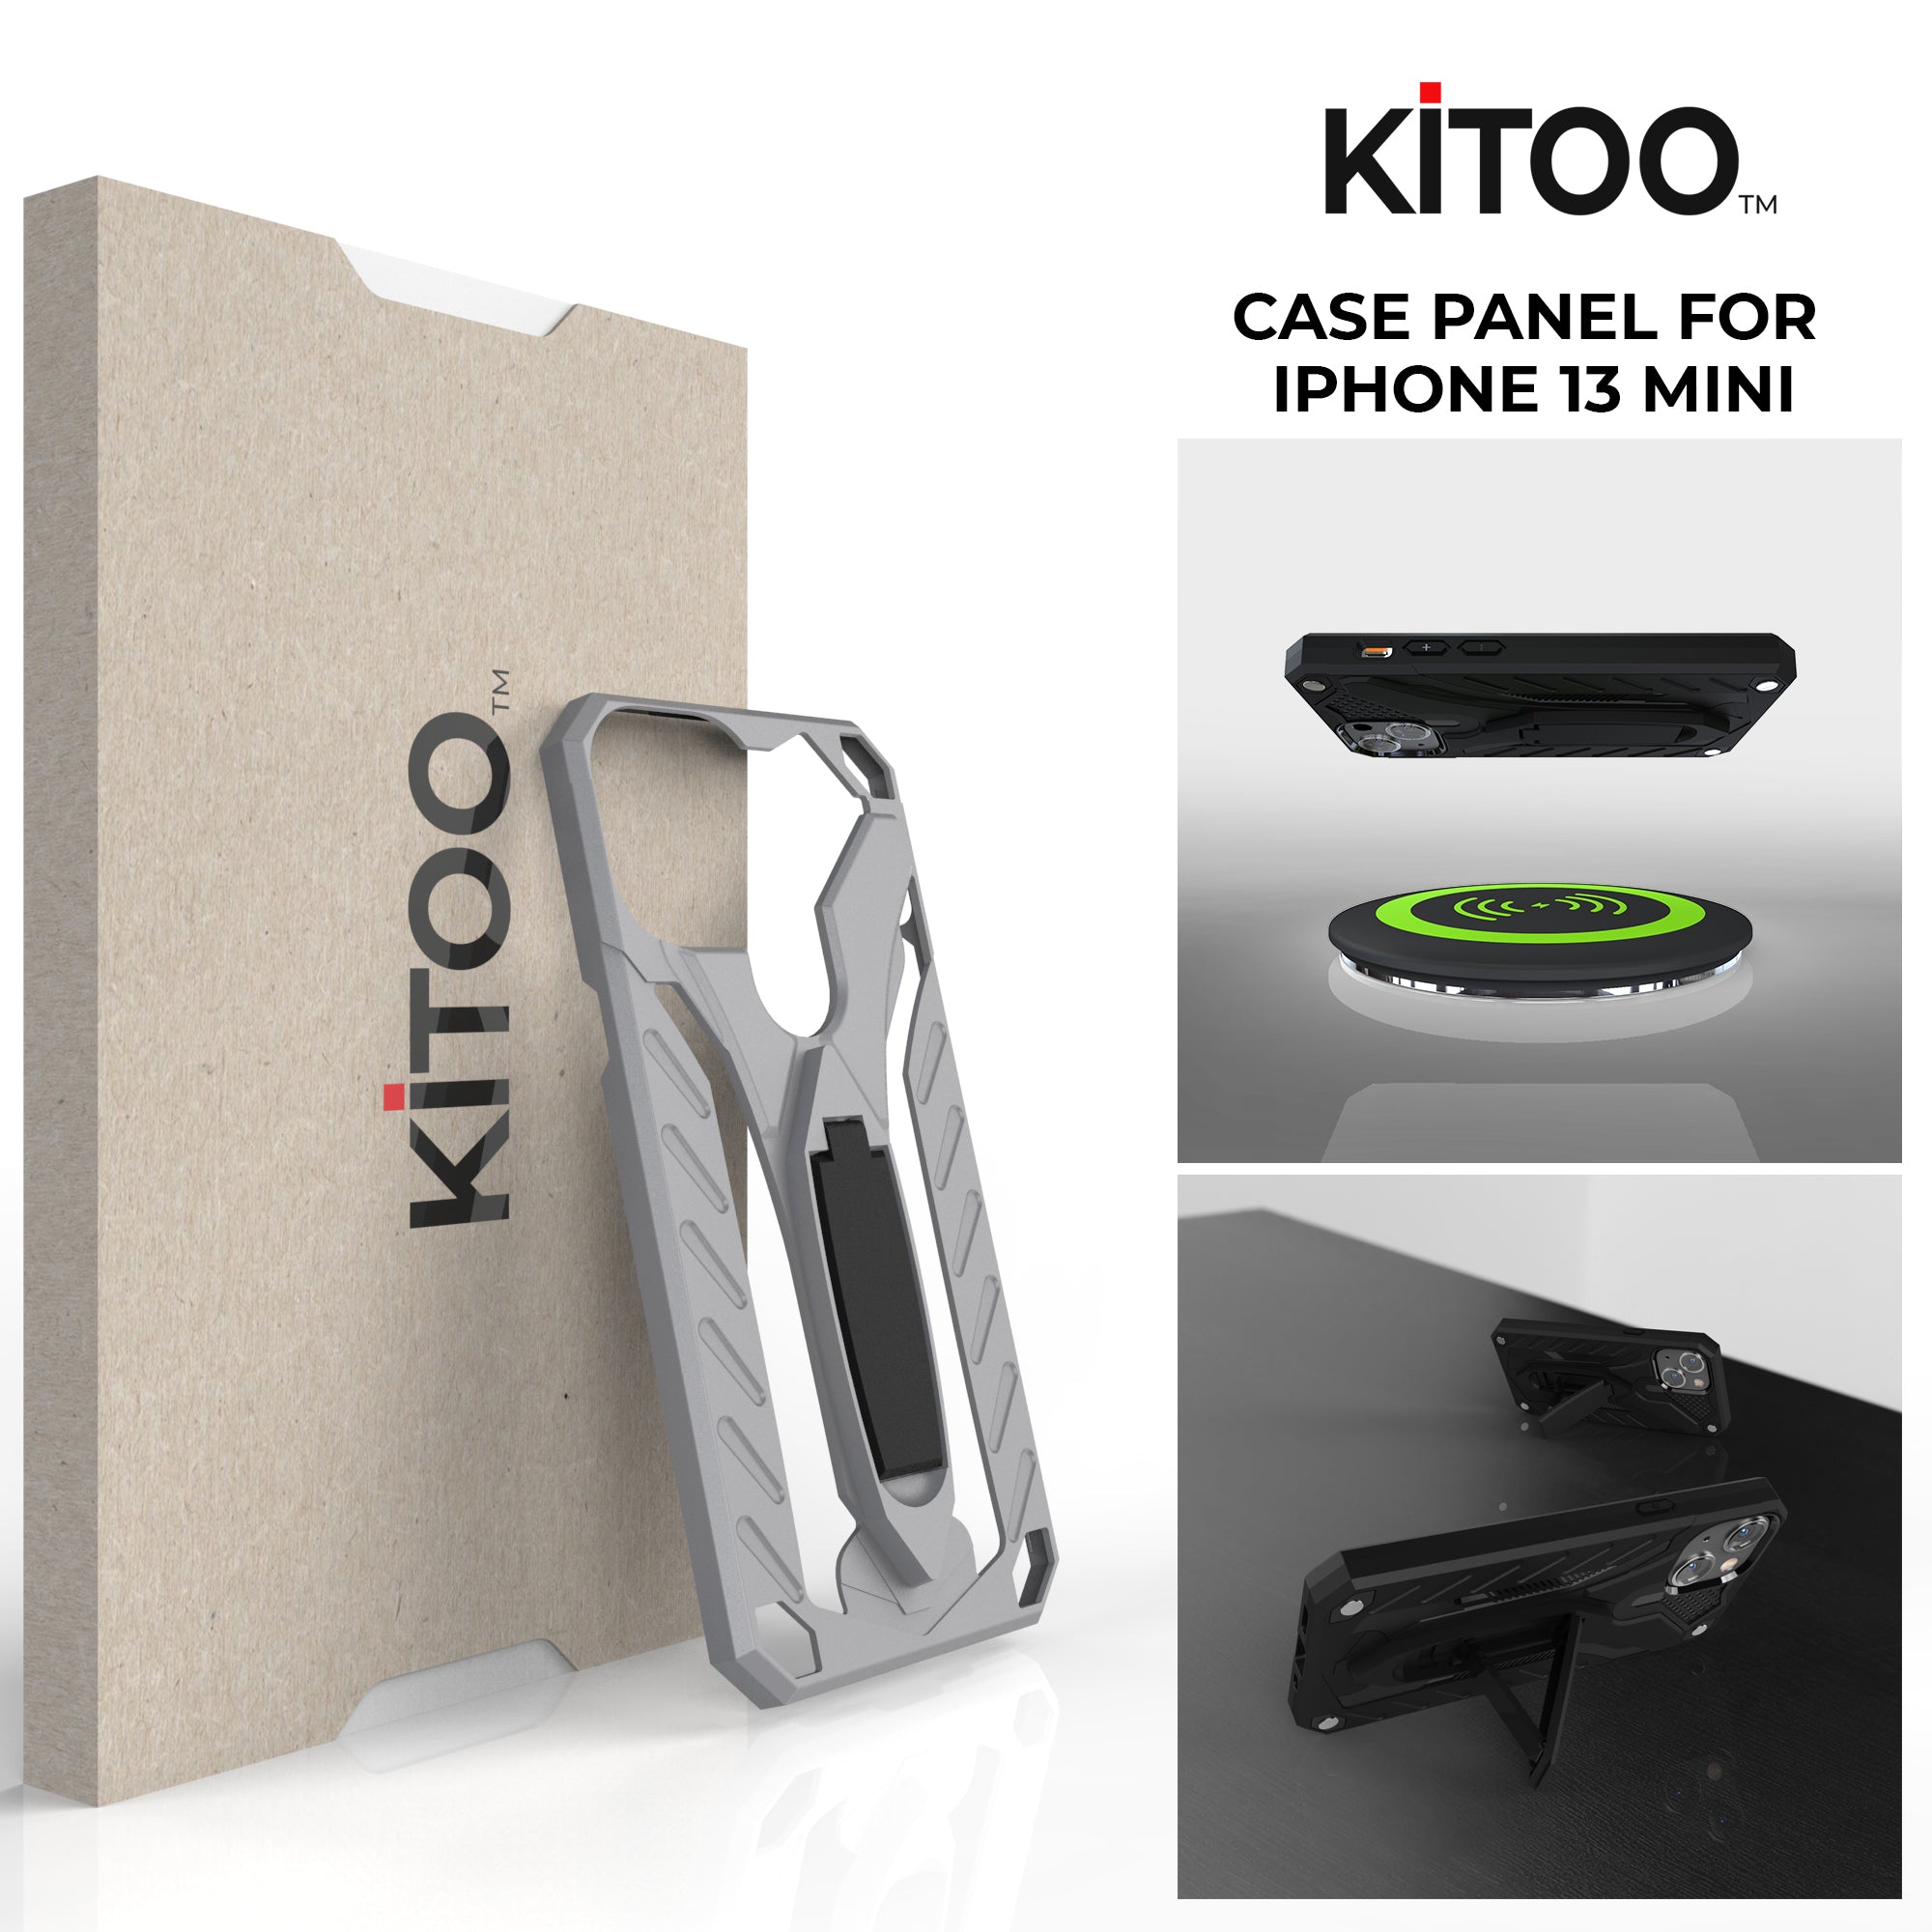 Kitoo Kickstand Panel Designed for iPhone 13 Mini case (Spare Part only) - Silvery